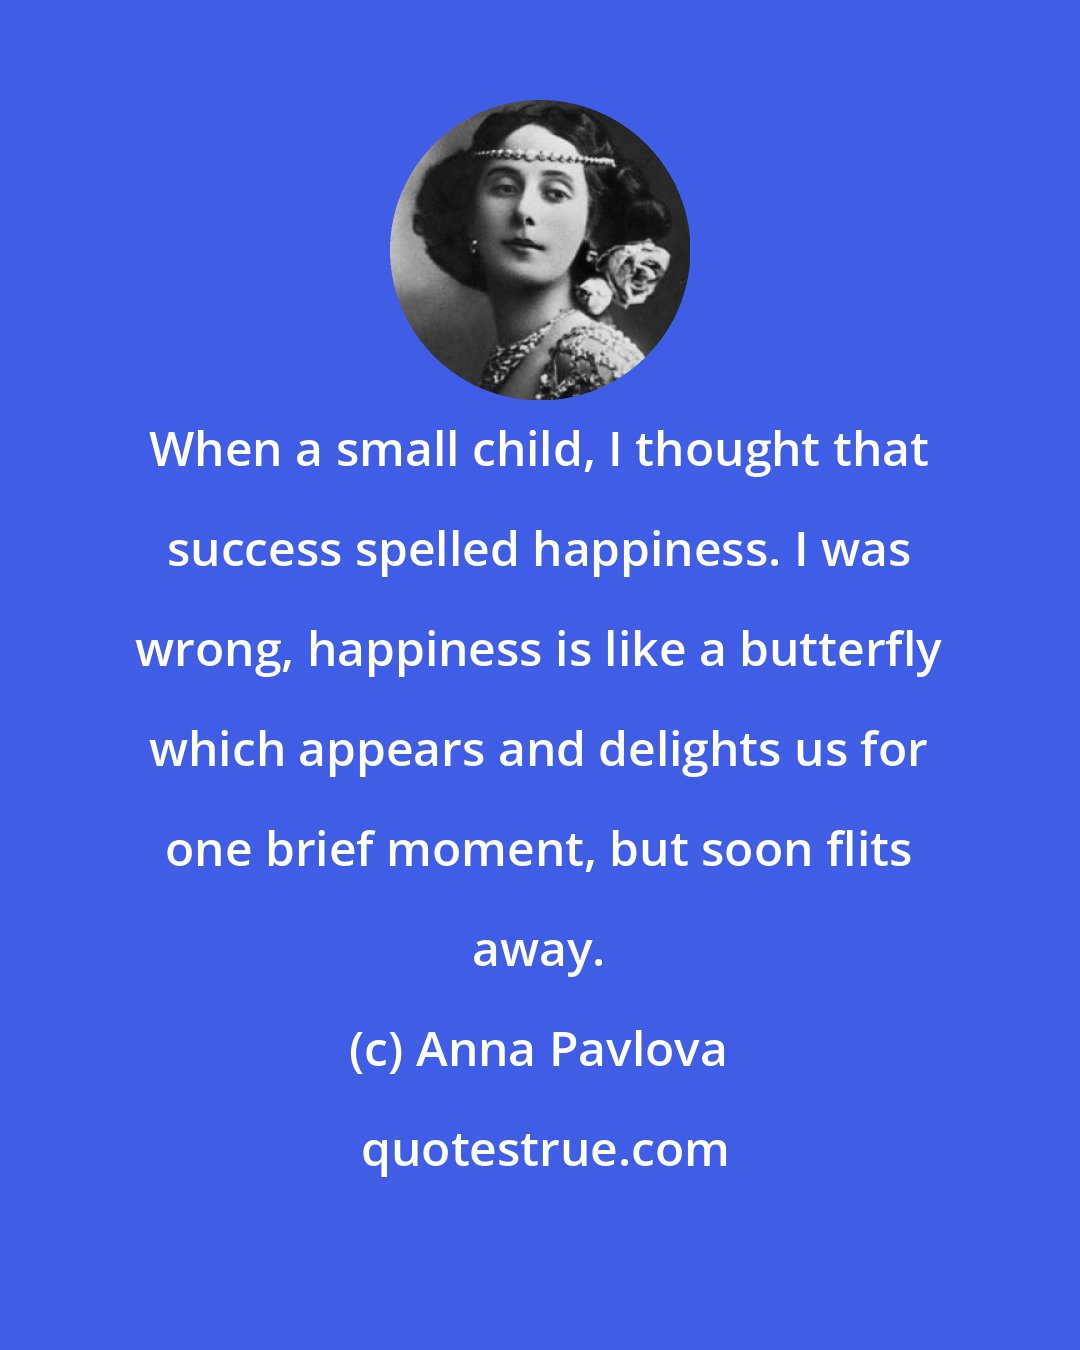 Anna Pavlova: When a small child, I thought that success spelled happiness. I was wrong, happiness is like a butterfly which appears and delights us for one brief moment, but soon flits away.